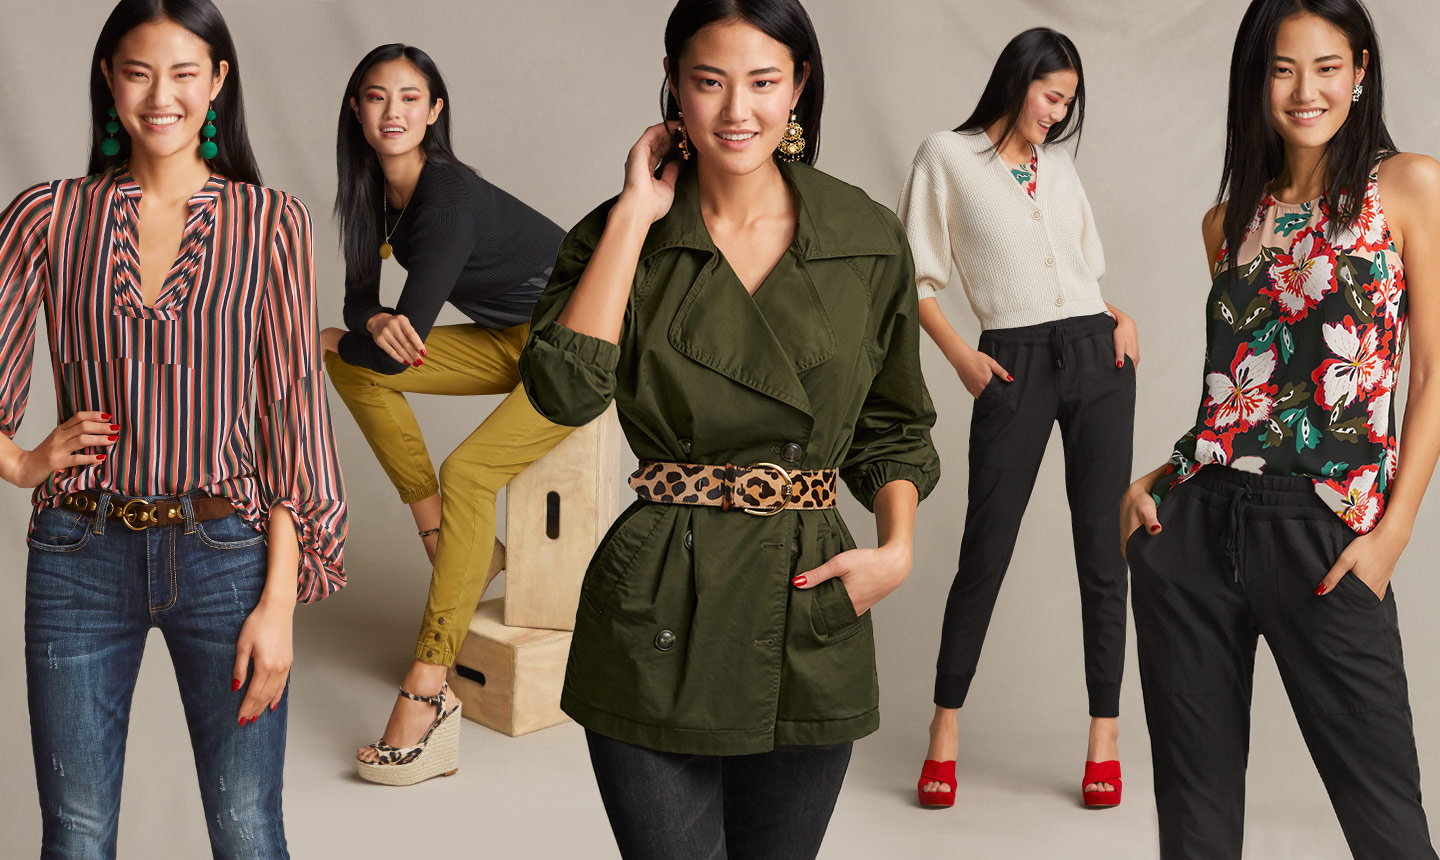 https://www.cabionline.com/wp-content/uploads/2019/01/cabi-Clothing-spring-2019-fashion-flash_featured-1.jpg